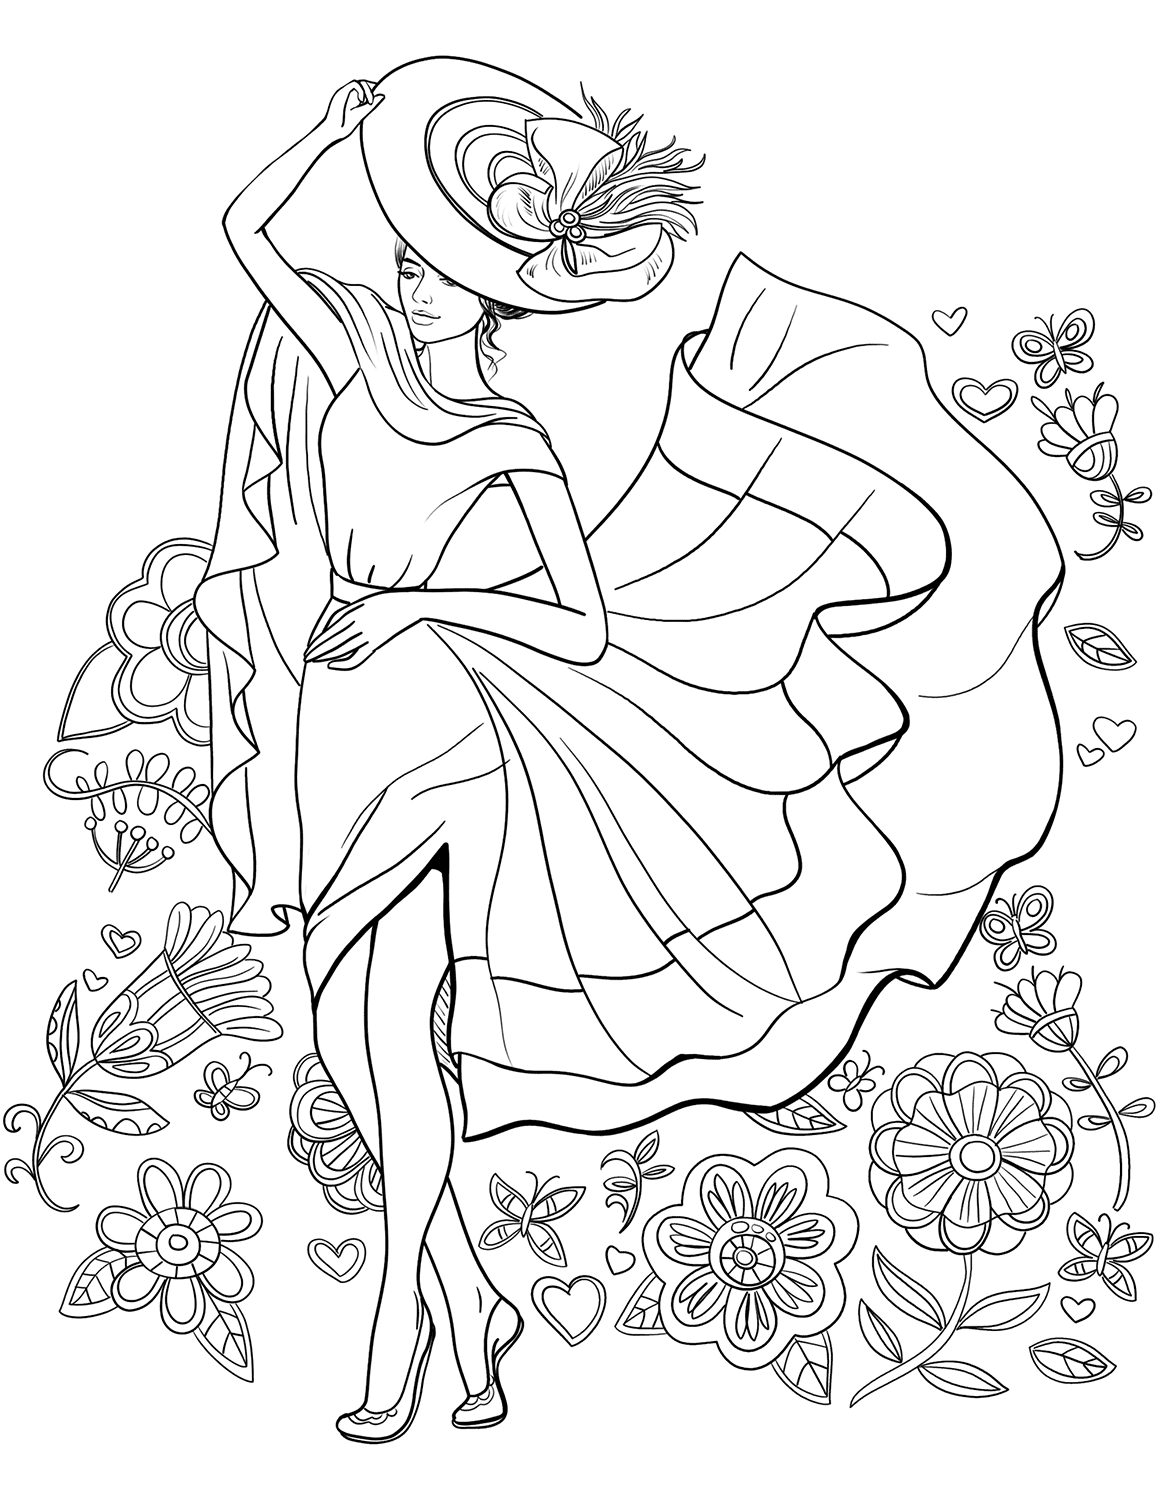 Beautiful Teenager Girl With Flowers Coloring Page Free Printable Coloring Pages For Kids